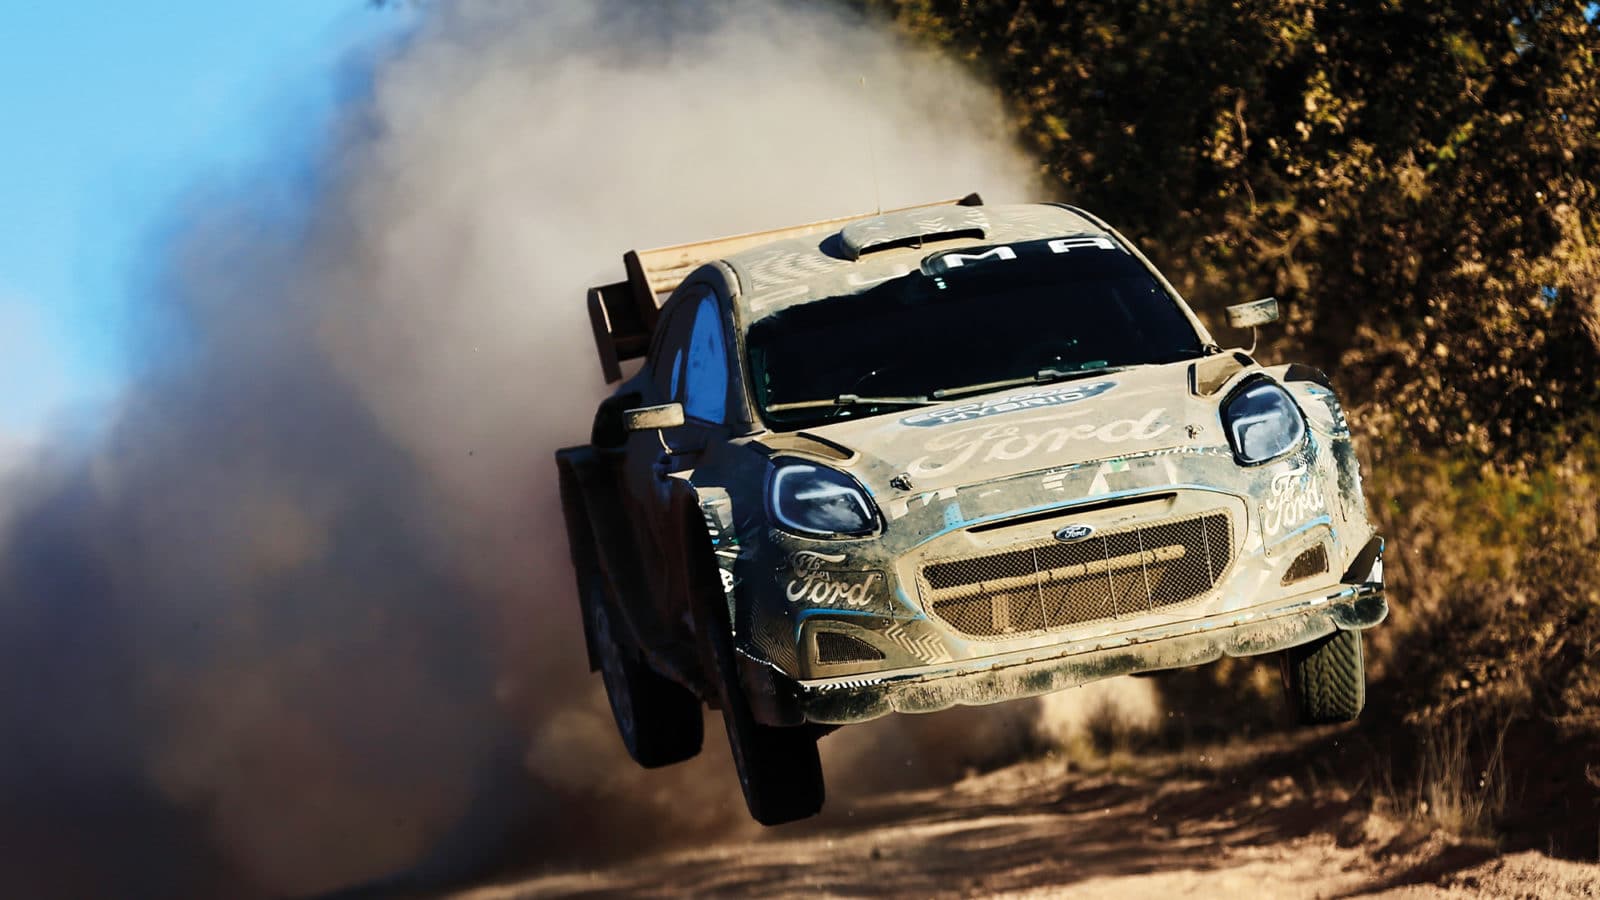 Ford Puma Rally car in mid air during testing